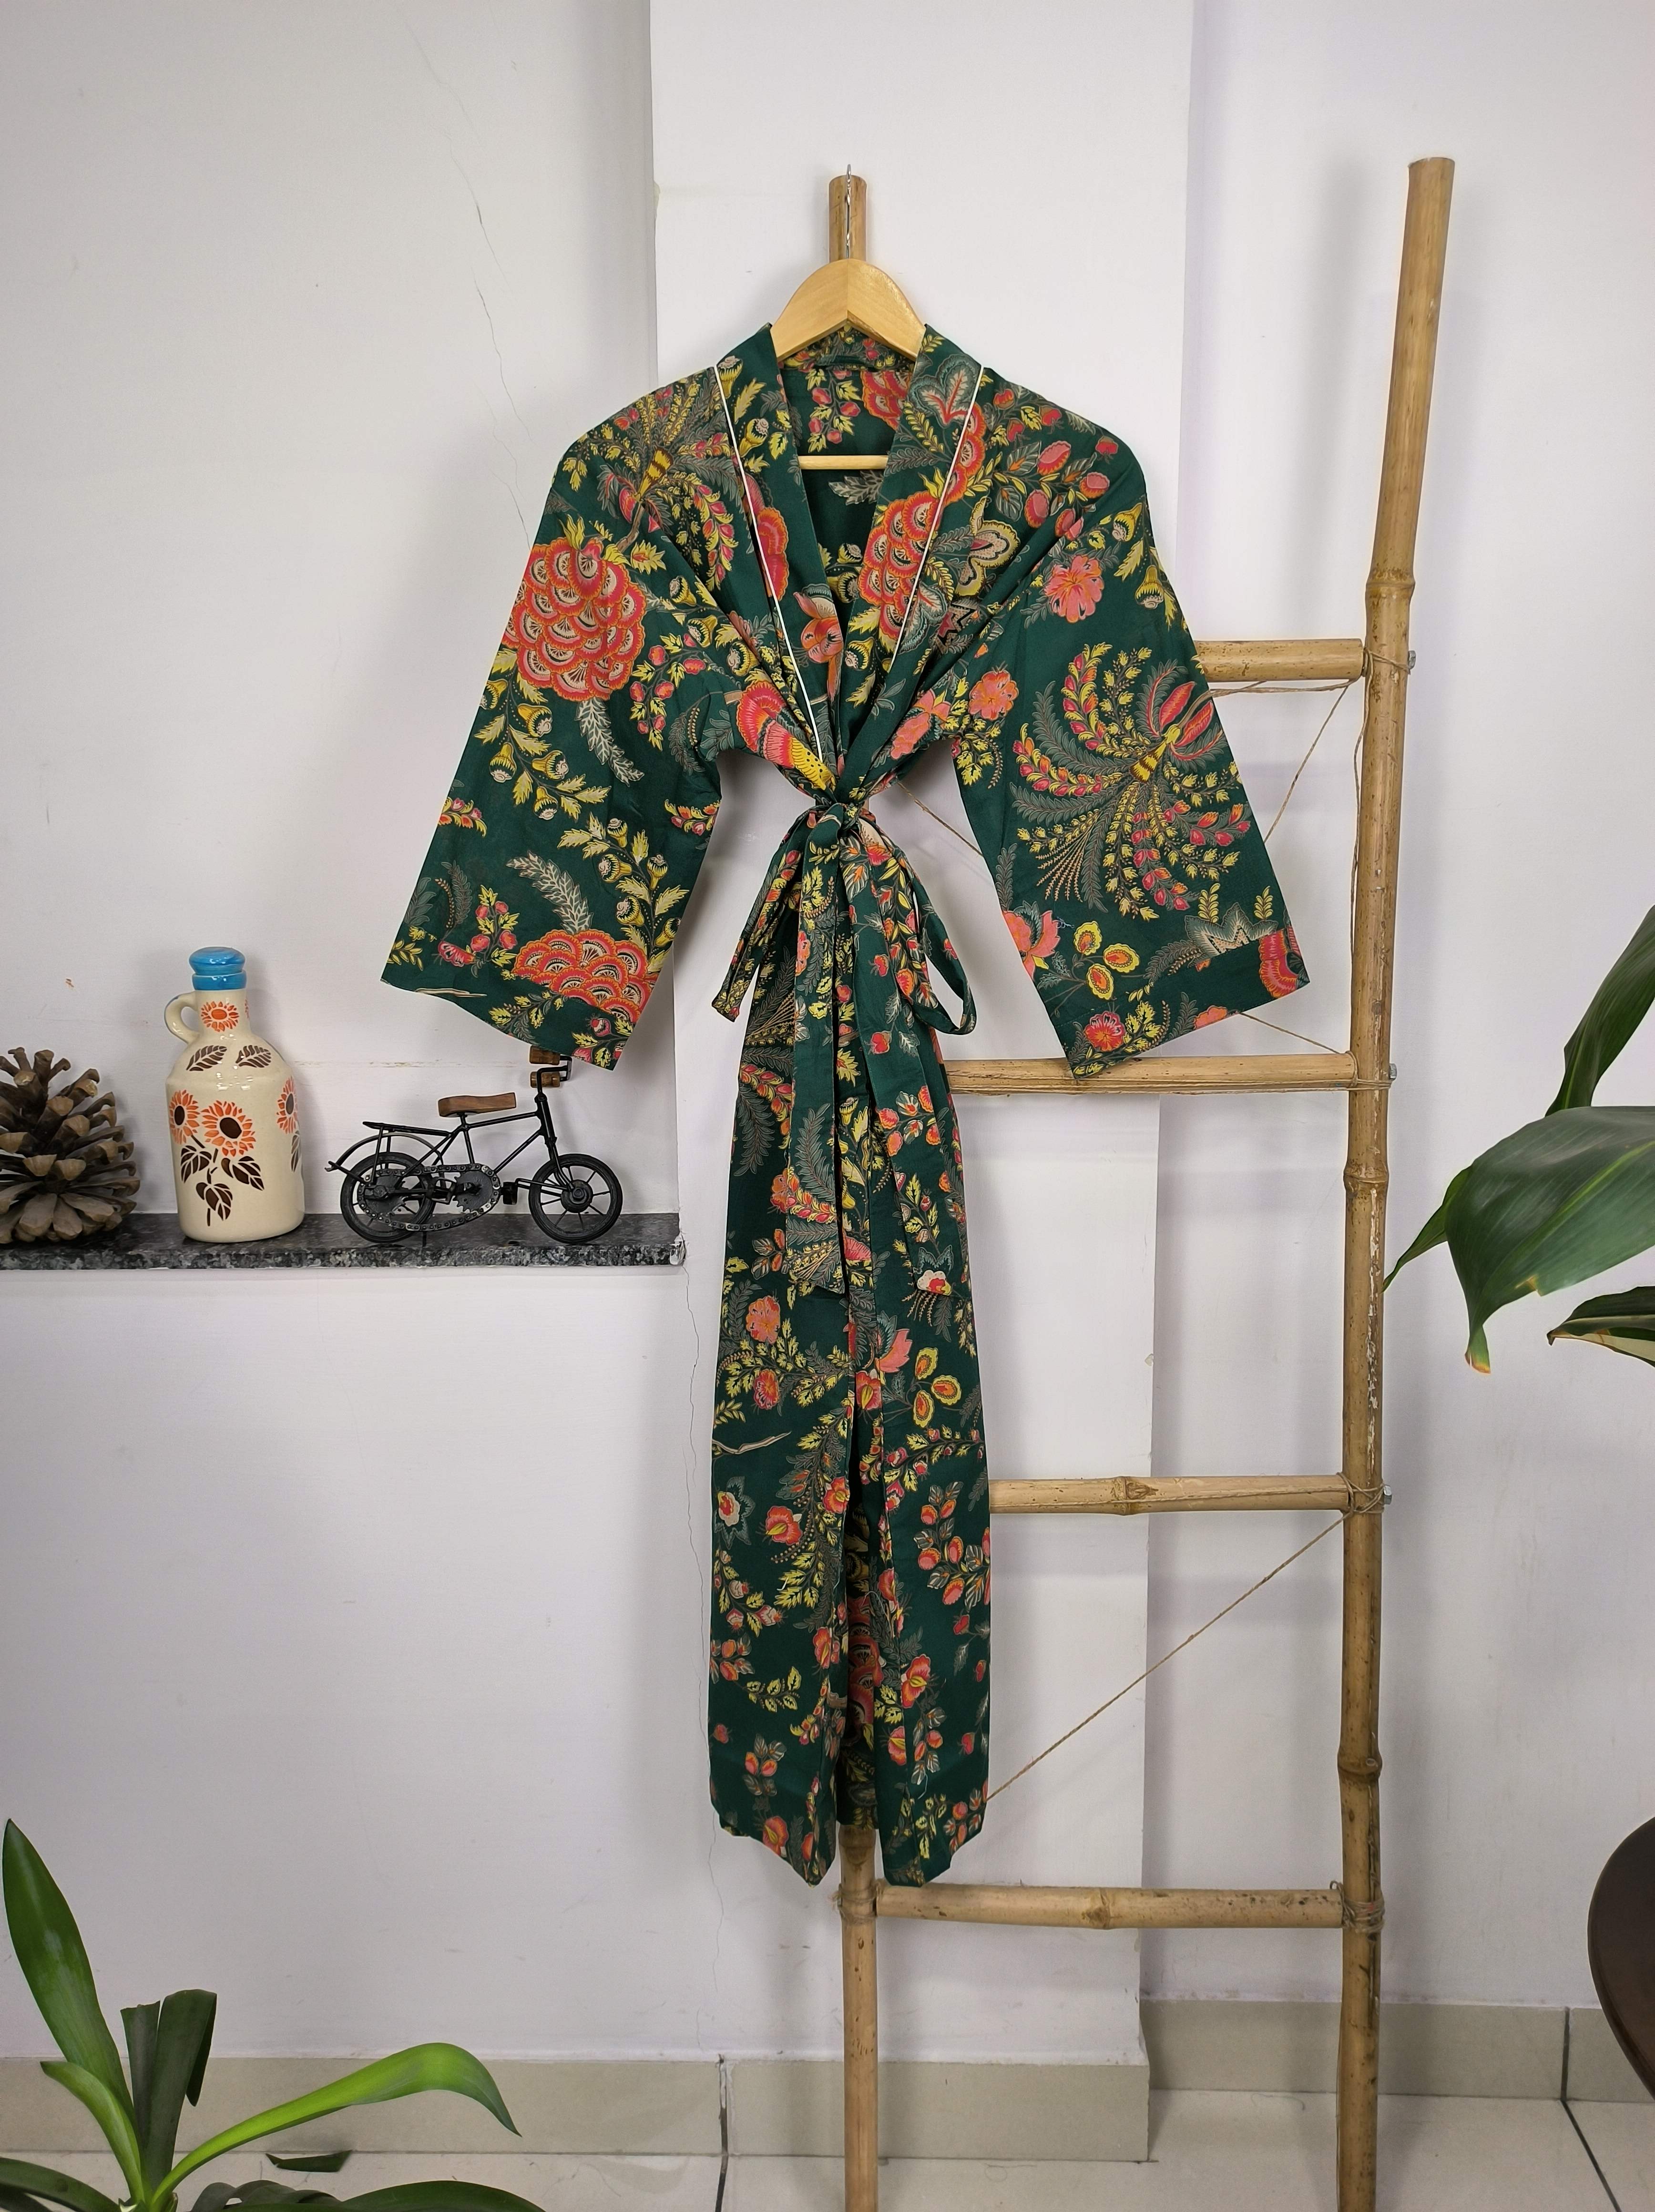 Pure Cotton Kimono Indian Handprinted Boho House Robe Summer Dress | Green Red Yellow Floral | Beach Cover Up Wear | Christmas Present